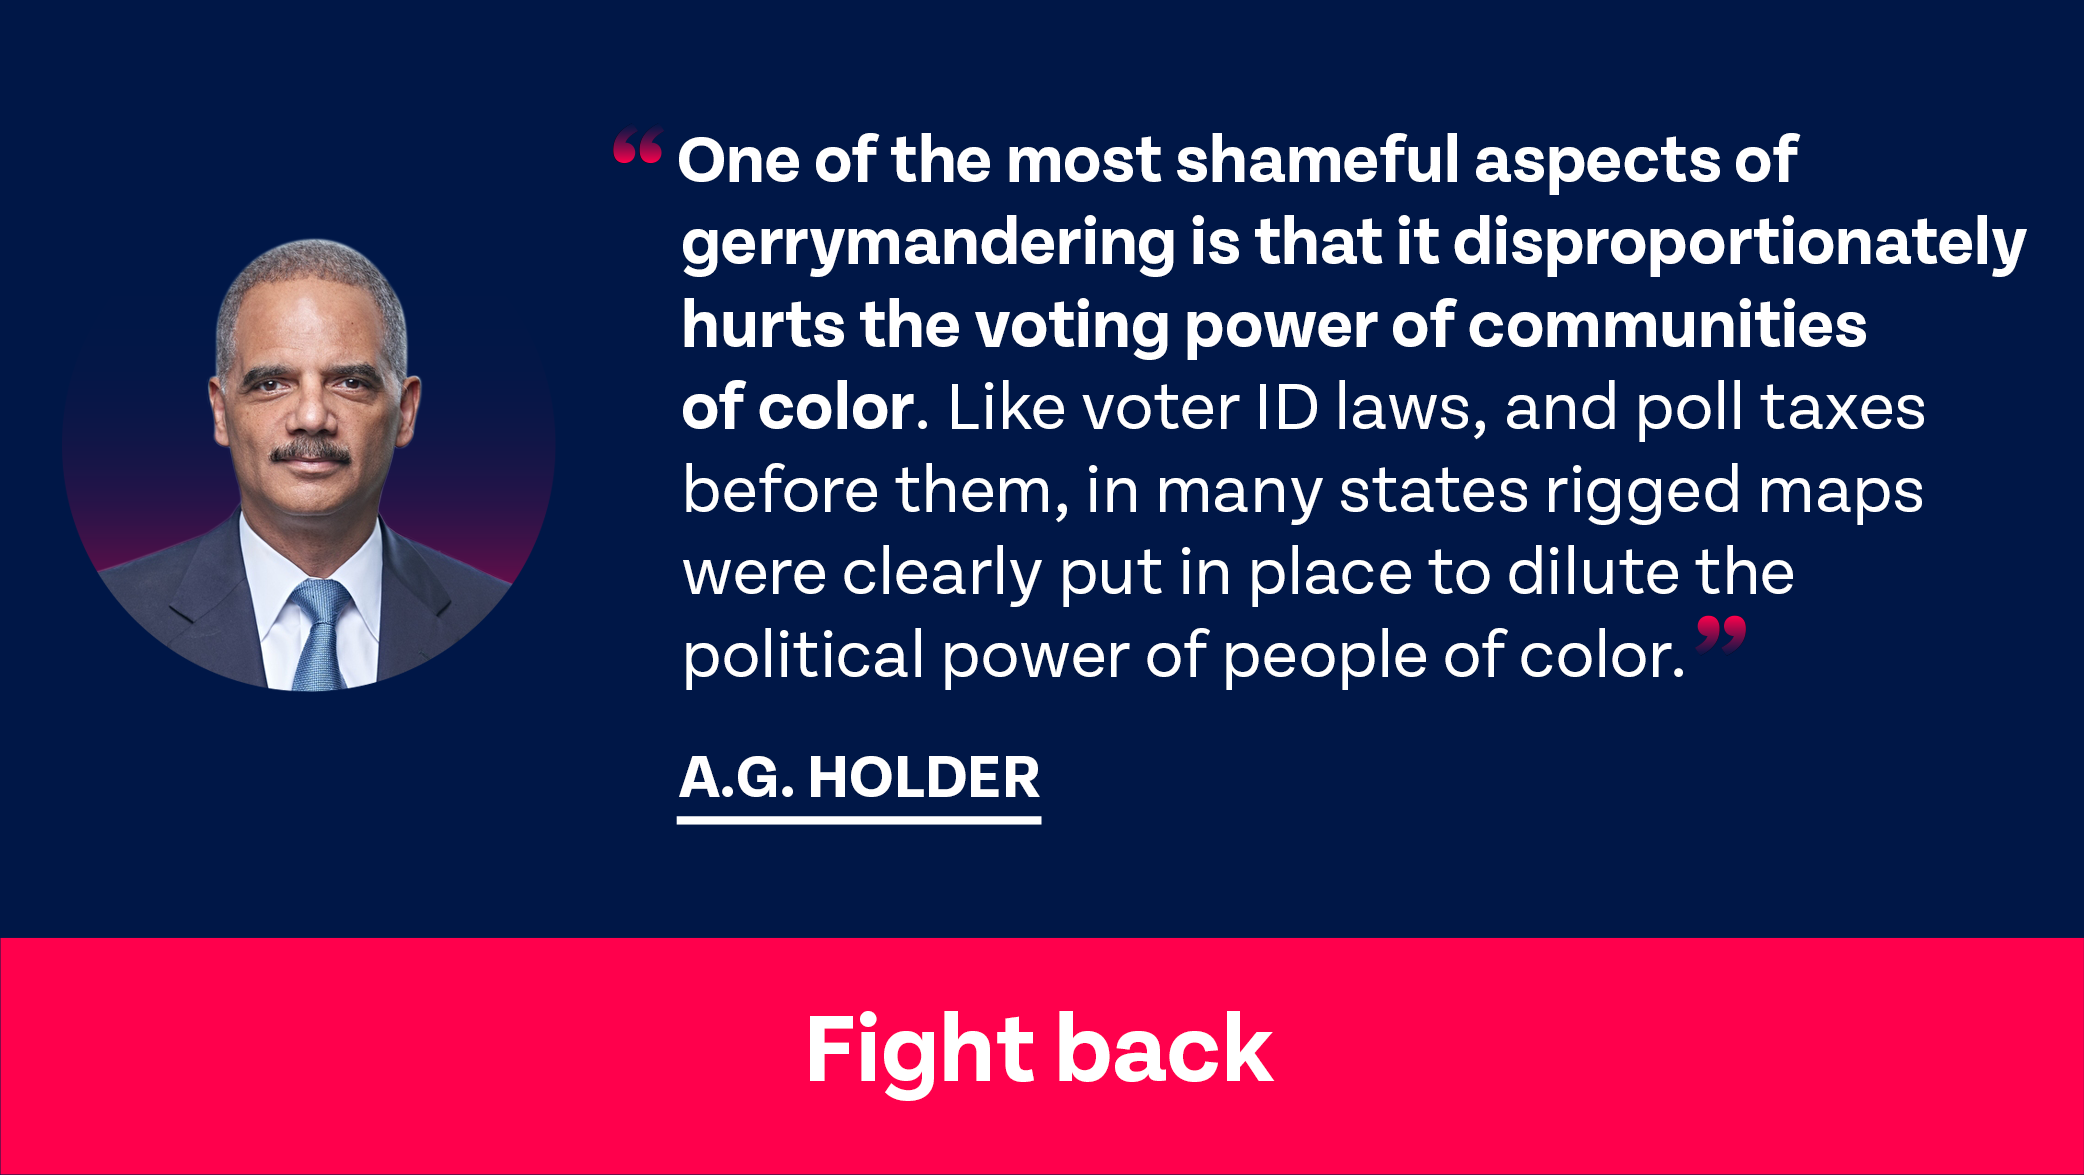 One of the most shameful aspects of gerrymandering is that it disproportionately hurts the voting power of communities of color. Like voter ID laws, and poll taxes before them, in many states rigged maps were clearly put in place to dilute the political power of people of color. - A.G. Holder